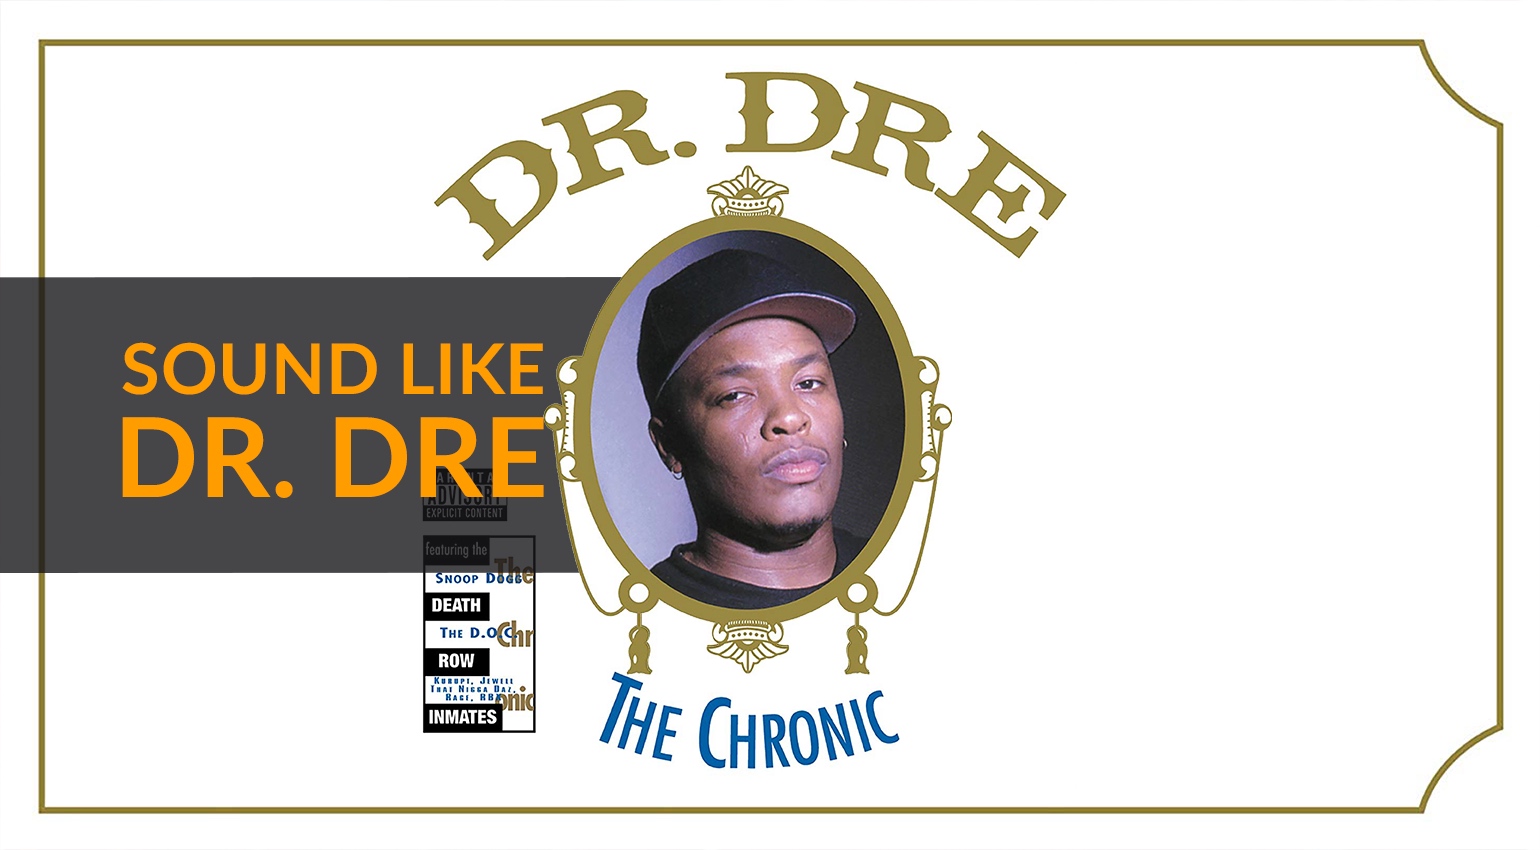 Straight Outta Compton: How To Sound Like Dr. Dre